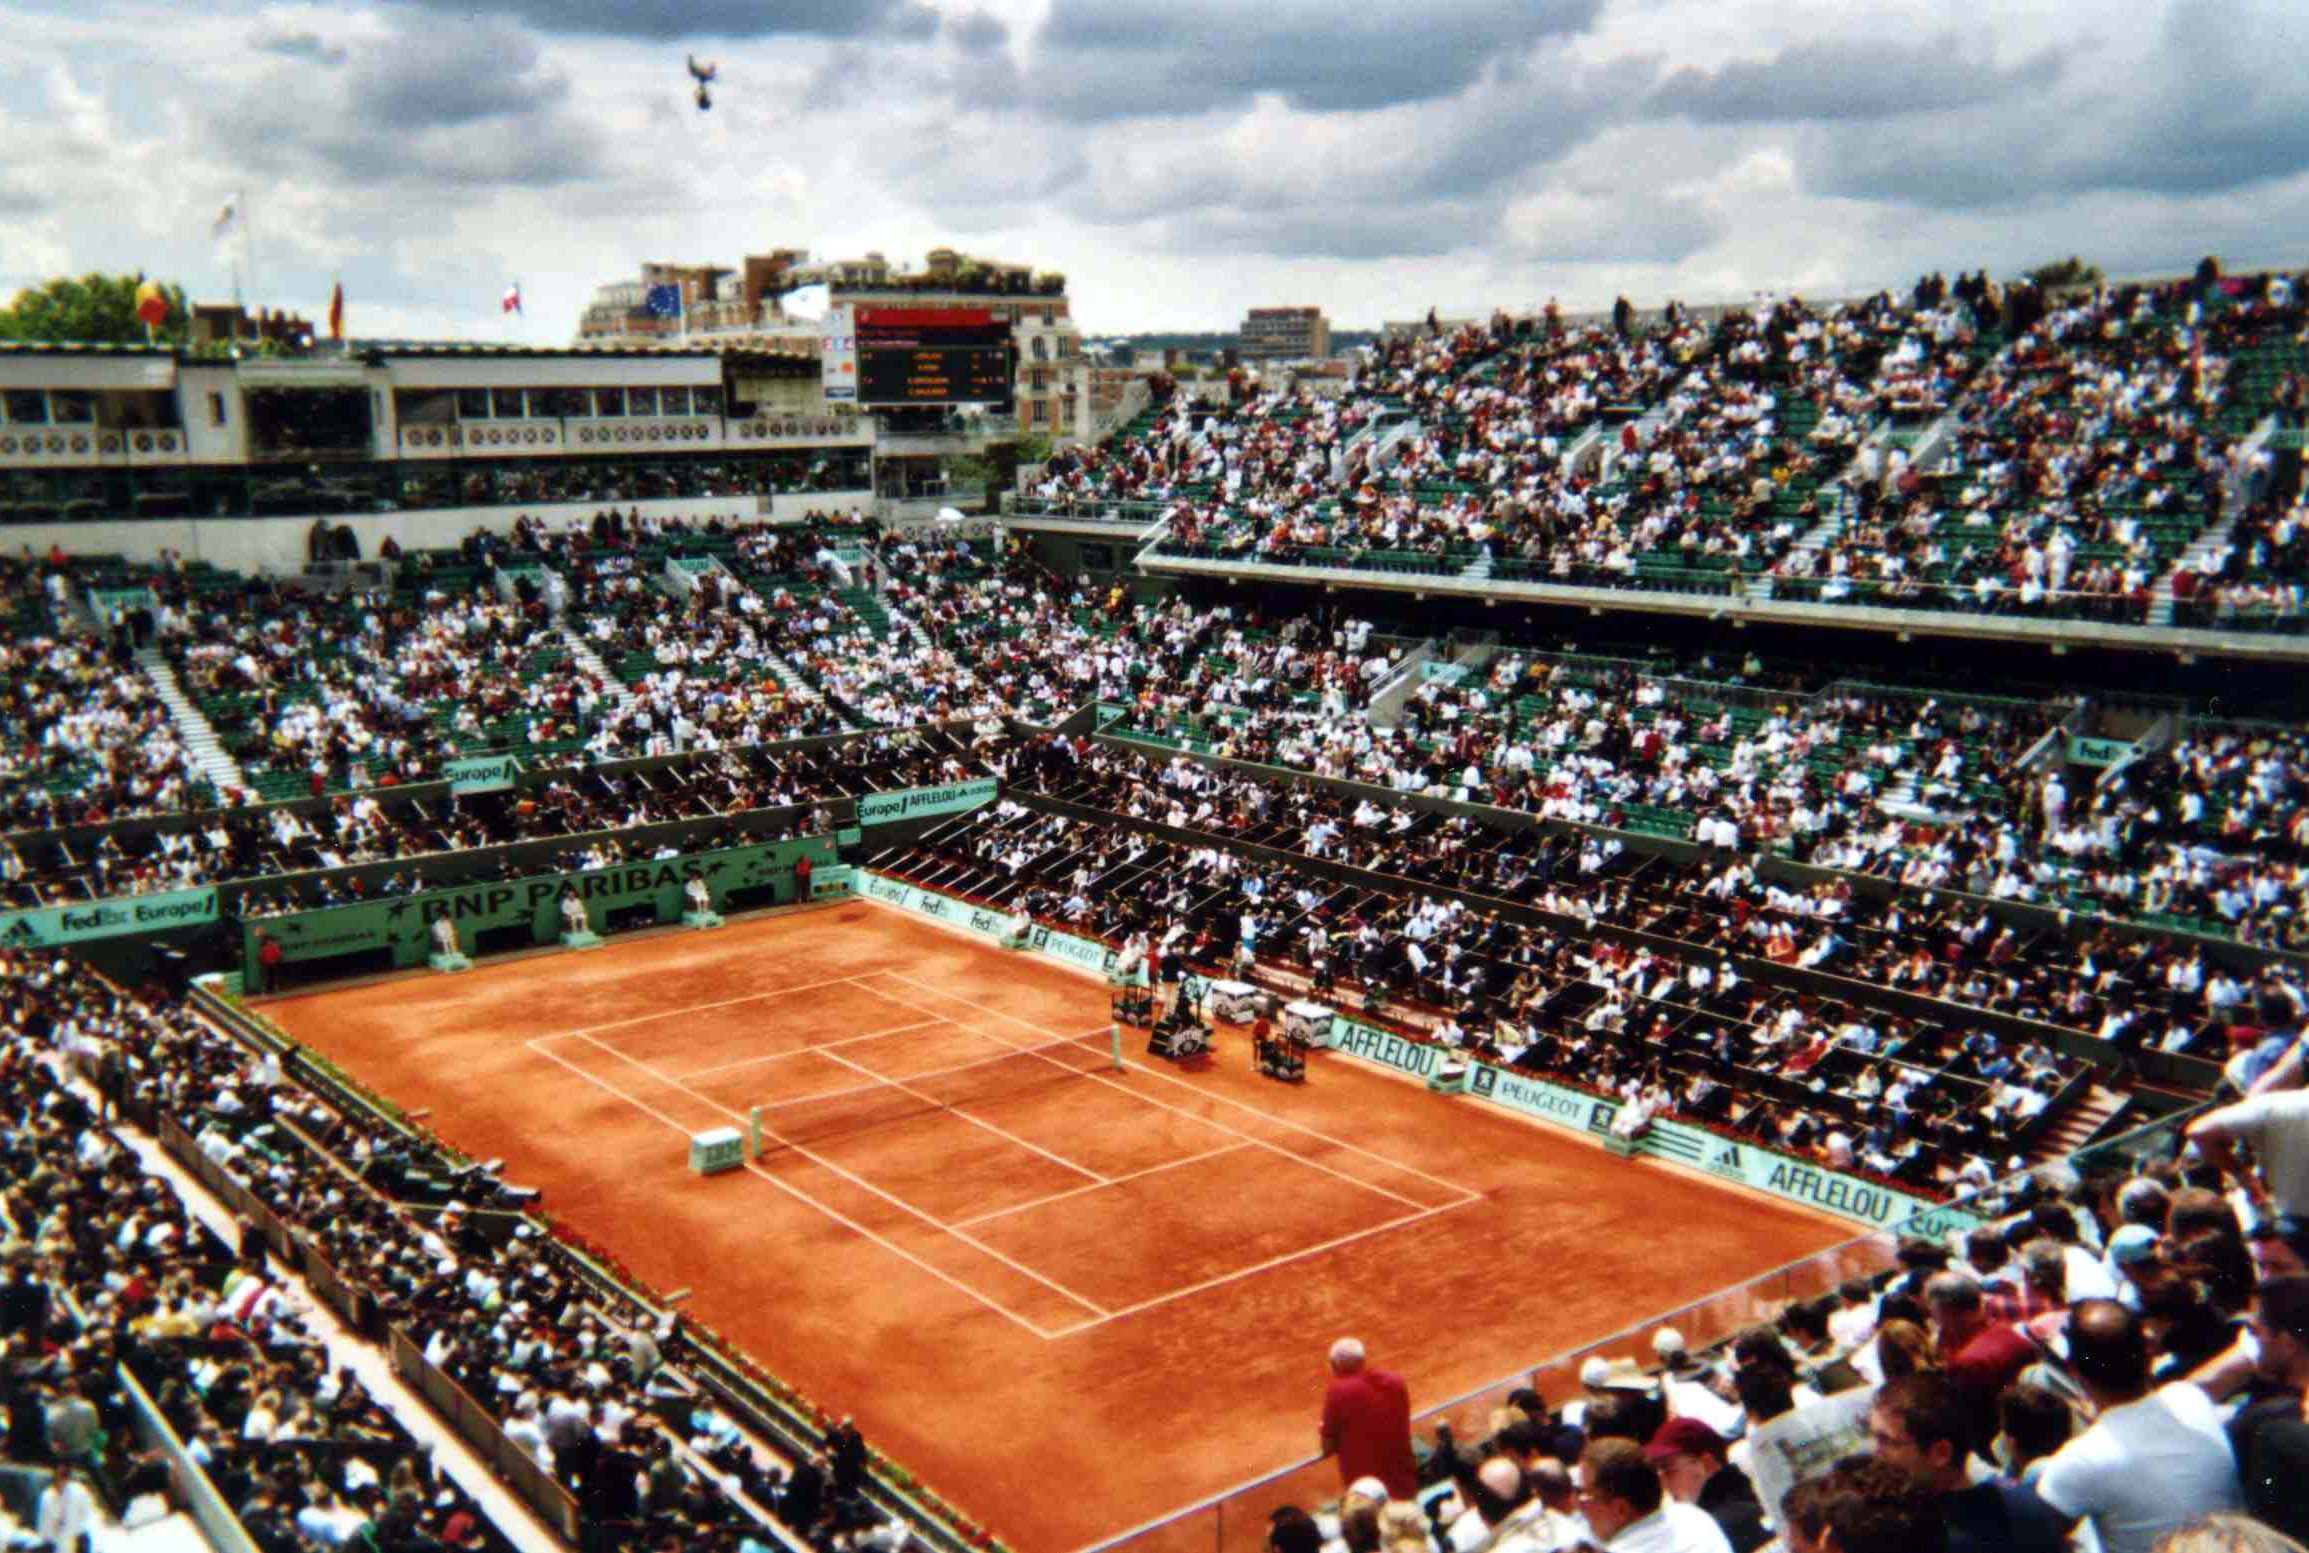 Court Philippe Chatrier at the Stade Roland-Garros, host of the French Open